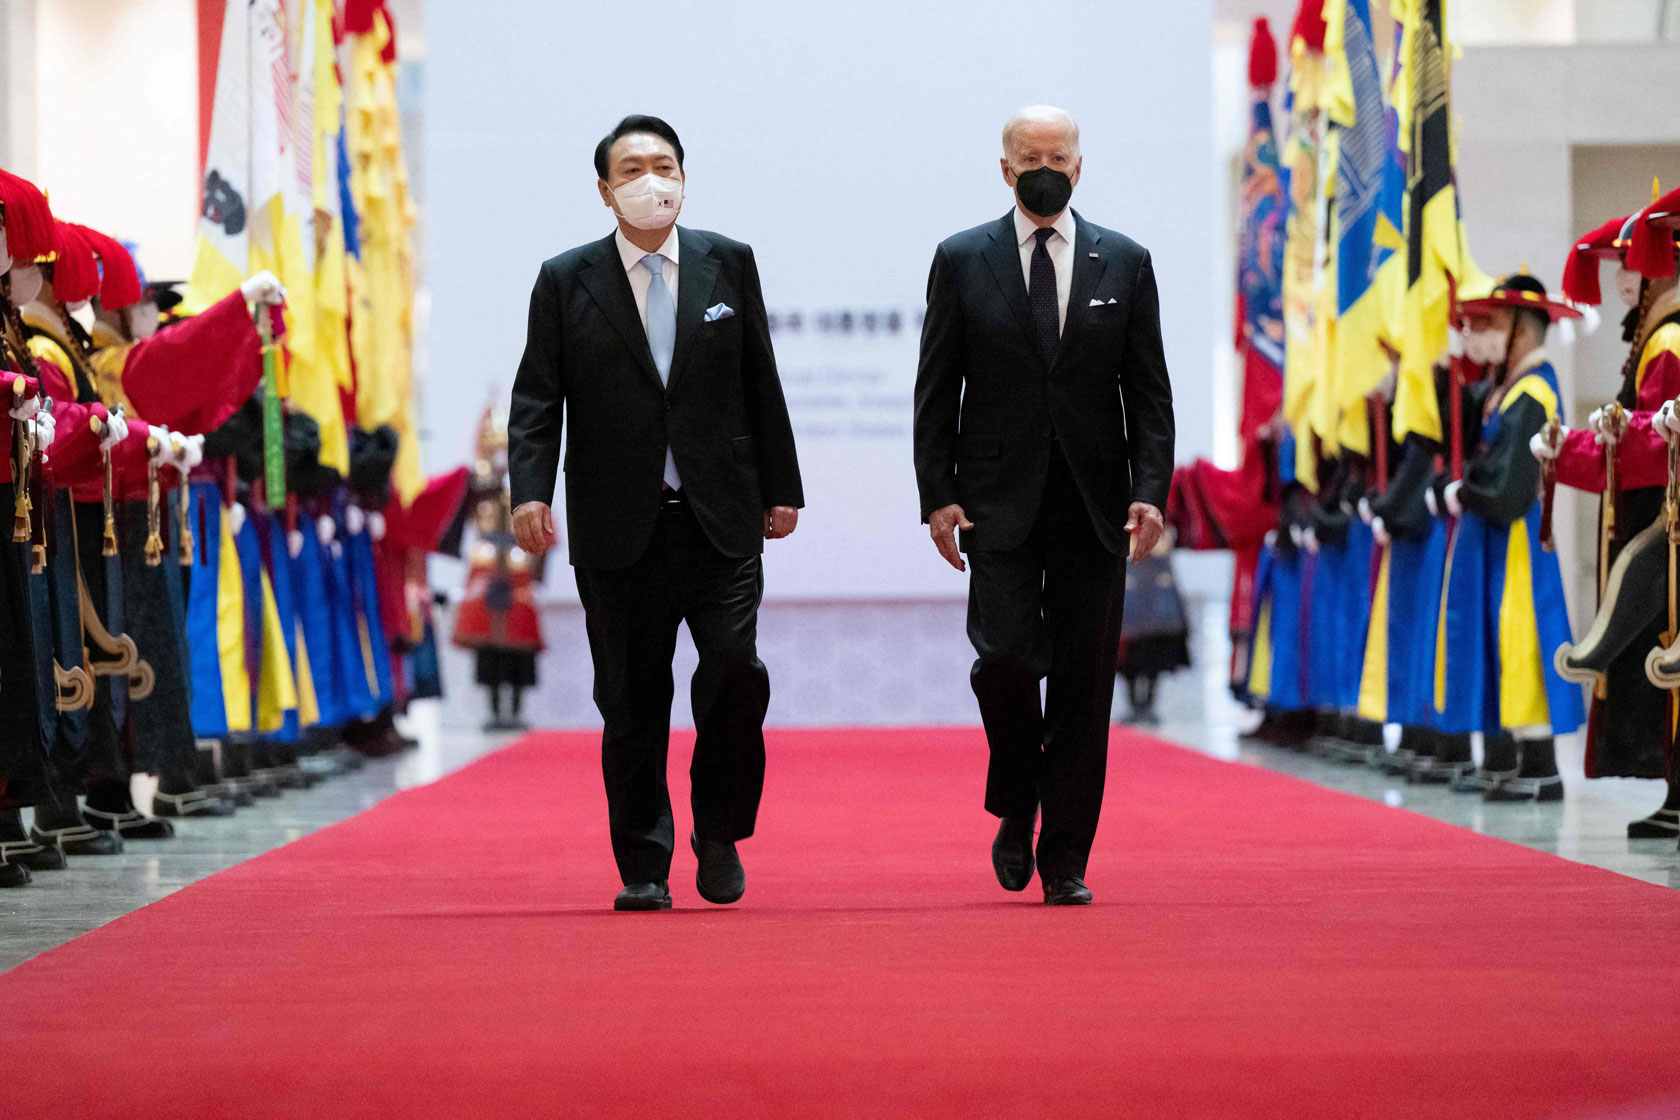 South Korean President Yoon Suk-yeol and U.S. President Joe Biden walk together as they arrive for a state dinner in South Korea.